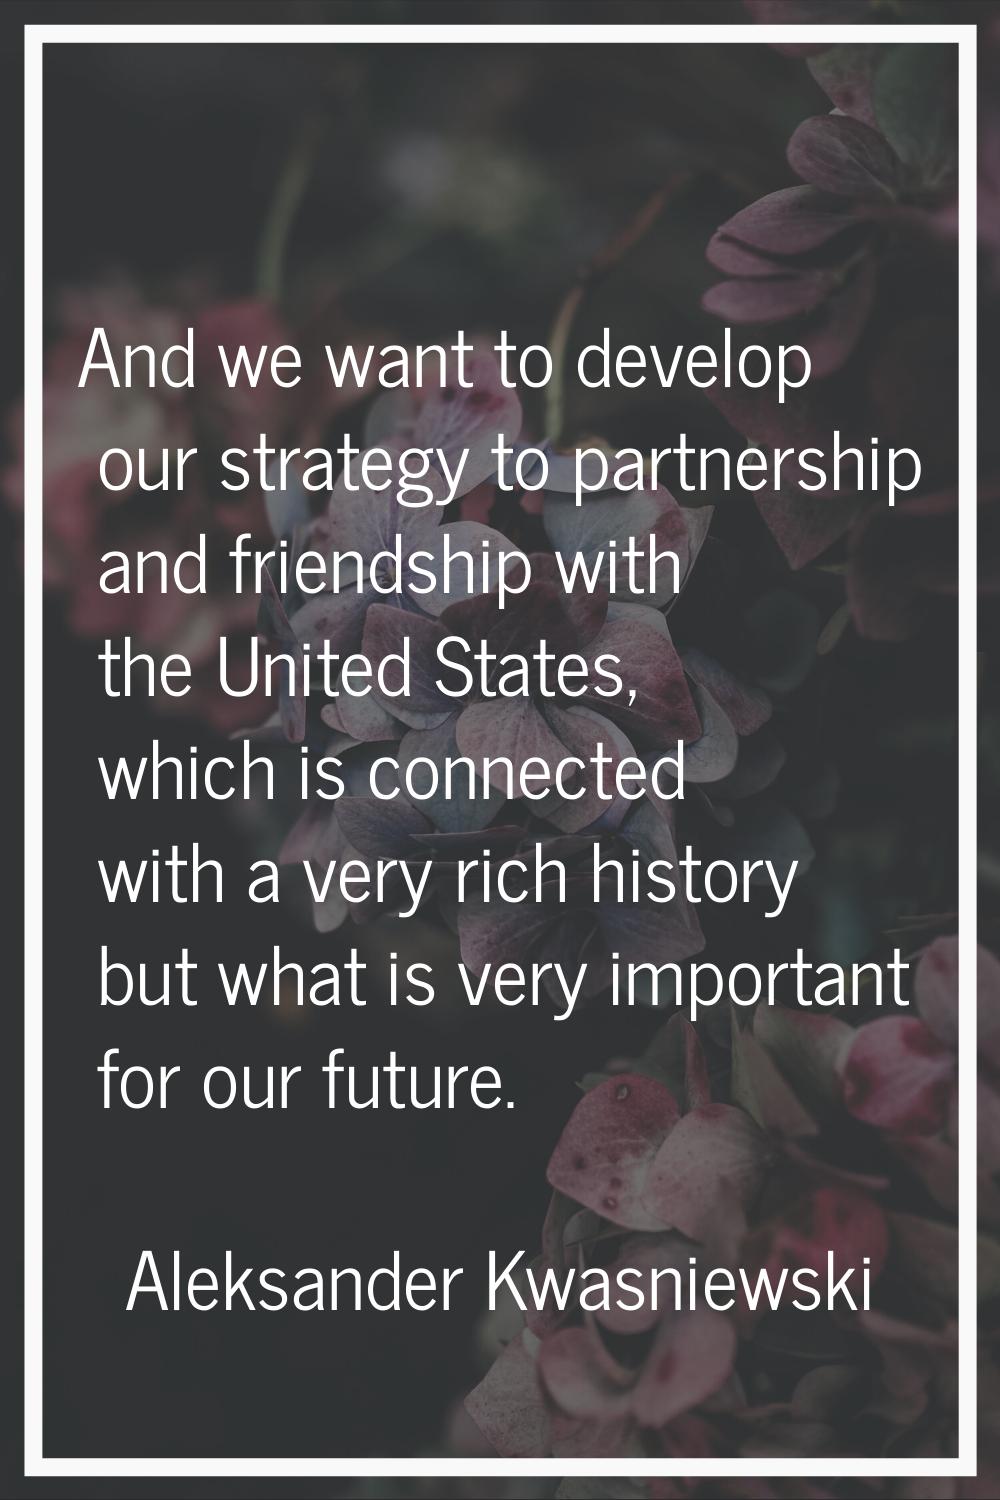 And we want to develop our strategy to partnership and friendship with the United States, which is 